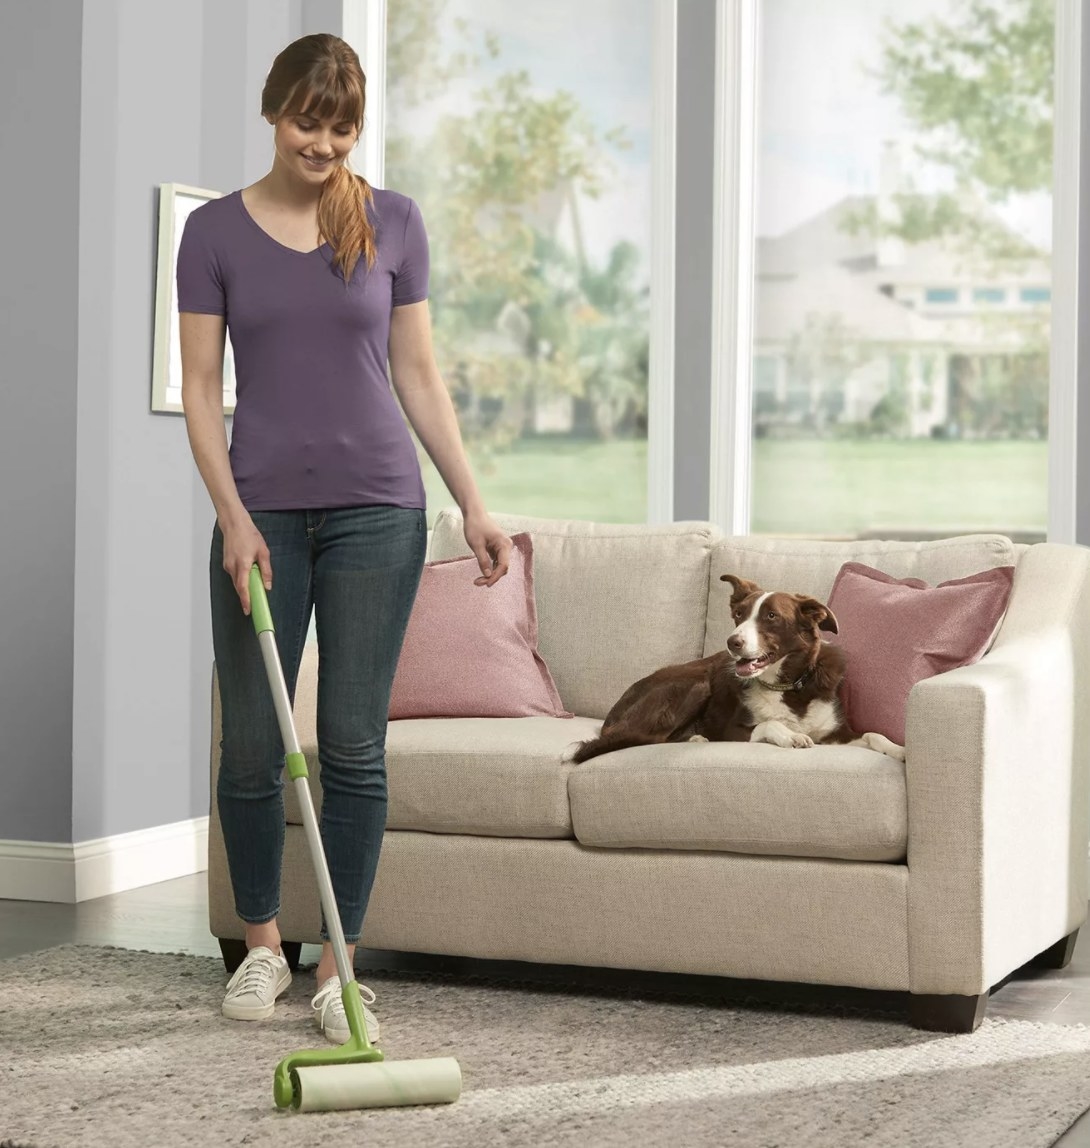 An adult uses the lint roller on the carpet while a dog on a couch nearby sits and watches